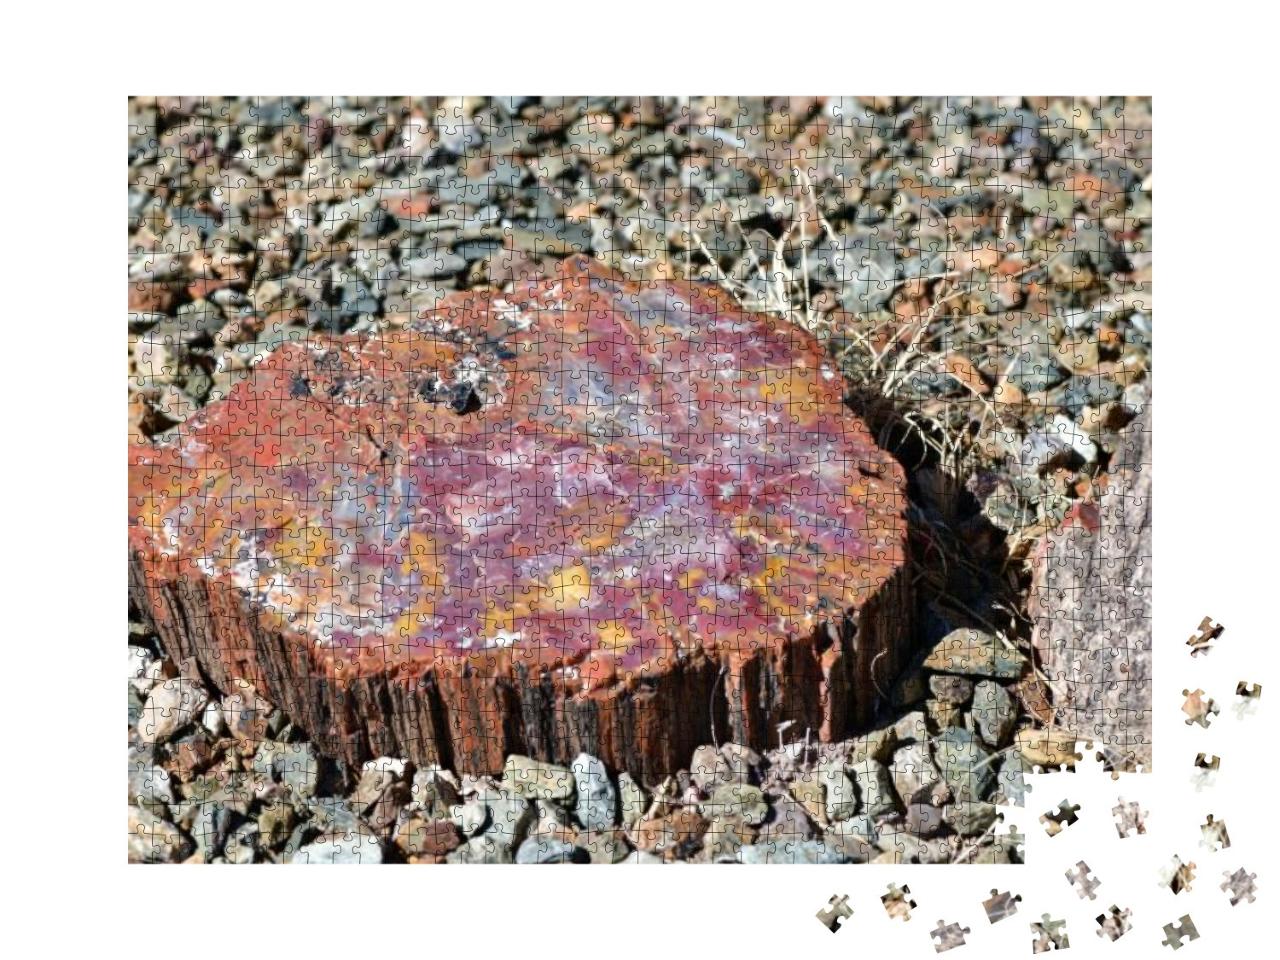 Petrified Wood Can be Found Scattered Across the Petrifie... Jigsaw Puzzle with 1000 pieces